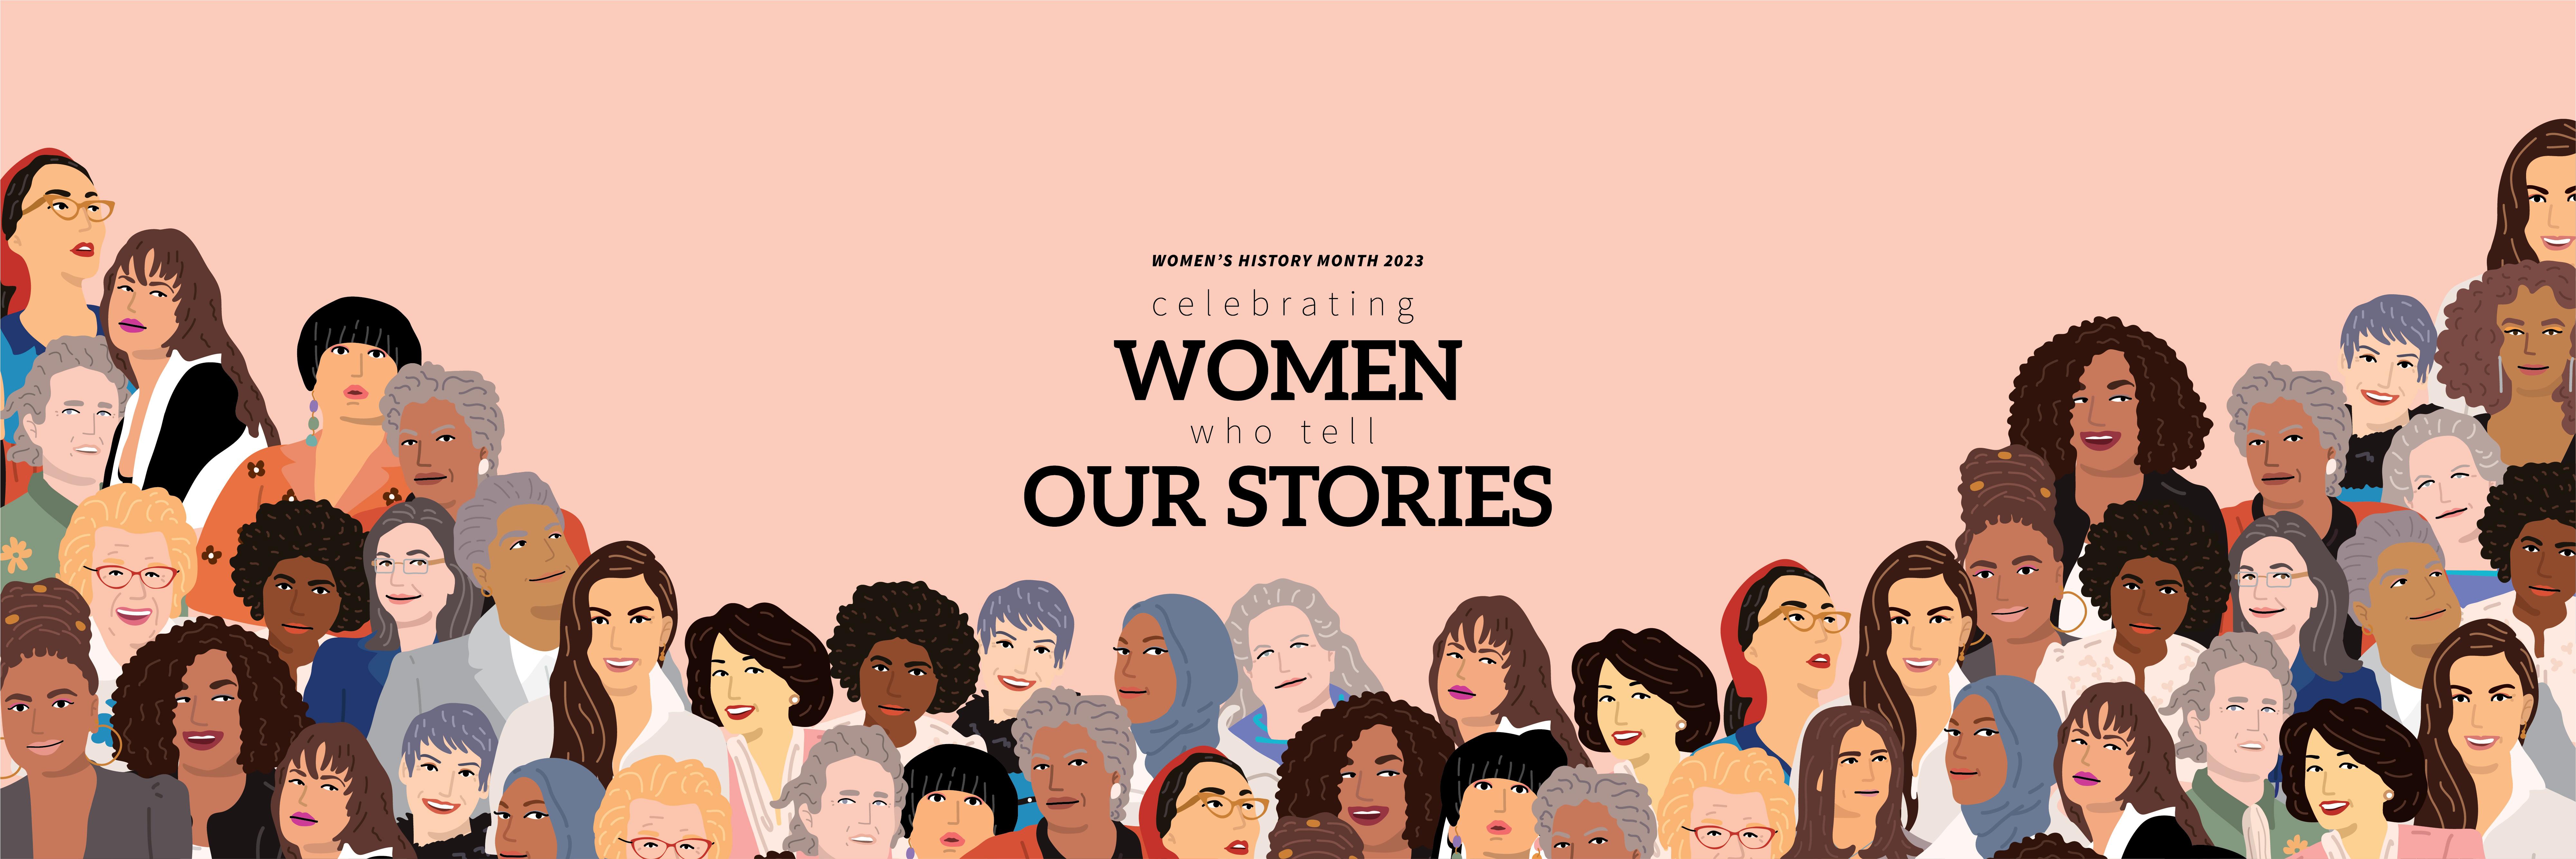 Women's History Month | Adele H. Stamp Student Union